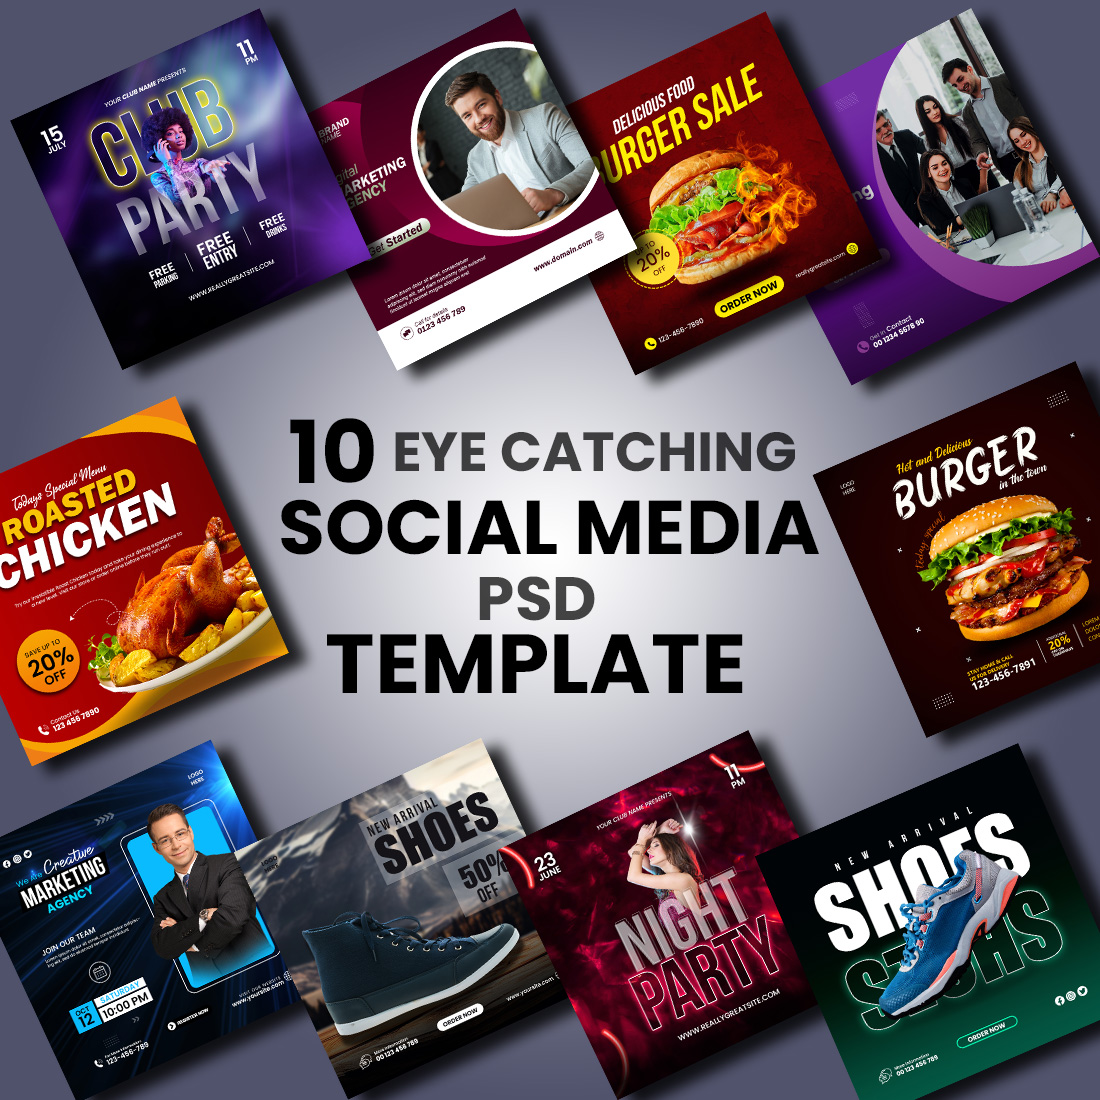 10 Eye Catching Social Media PSD Template cover image.